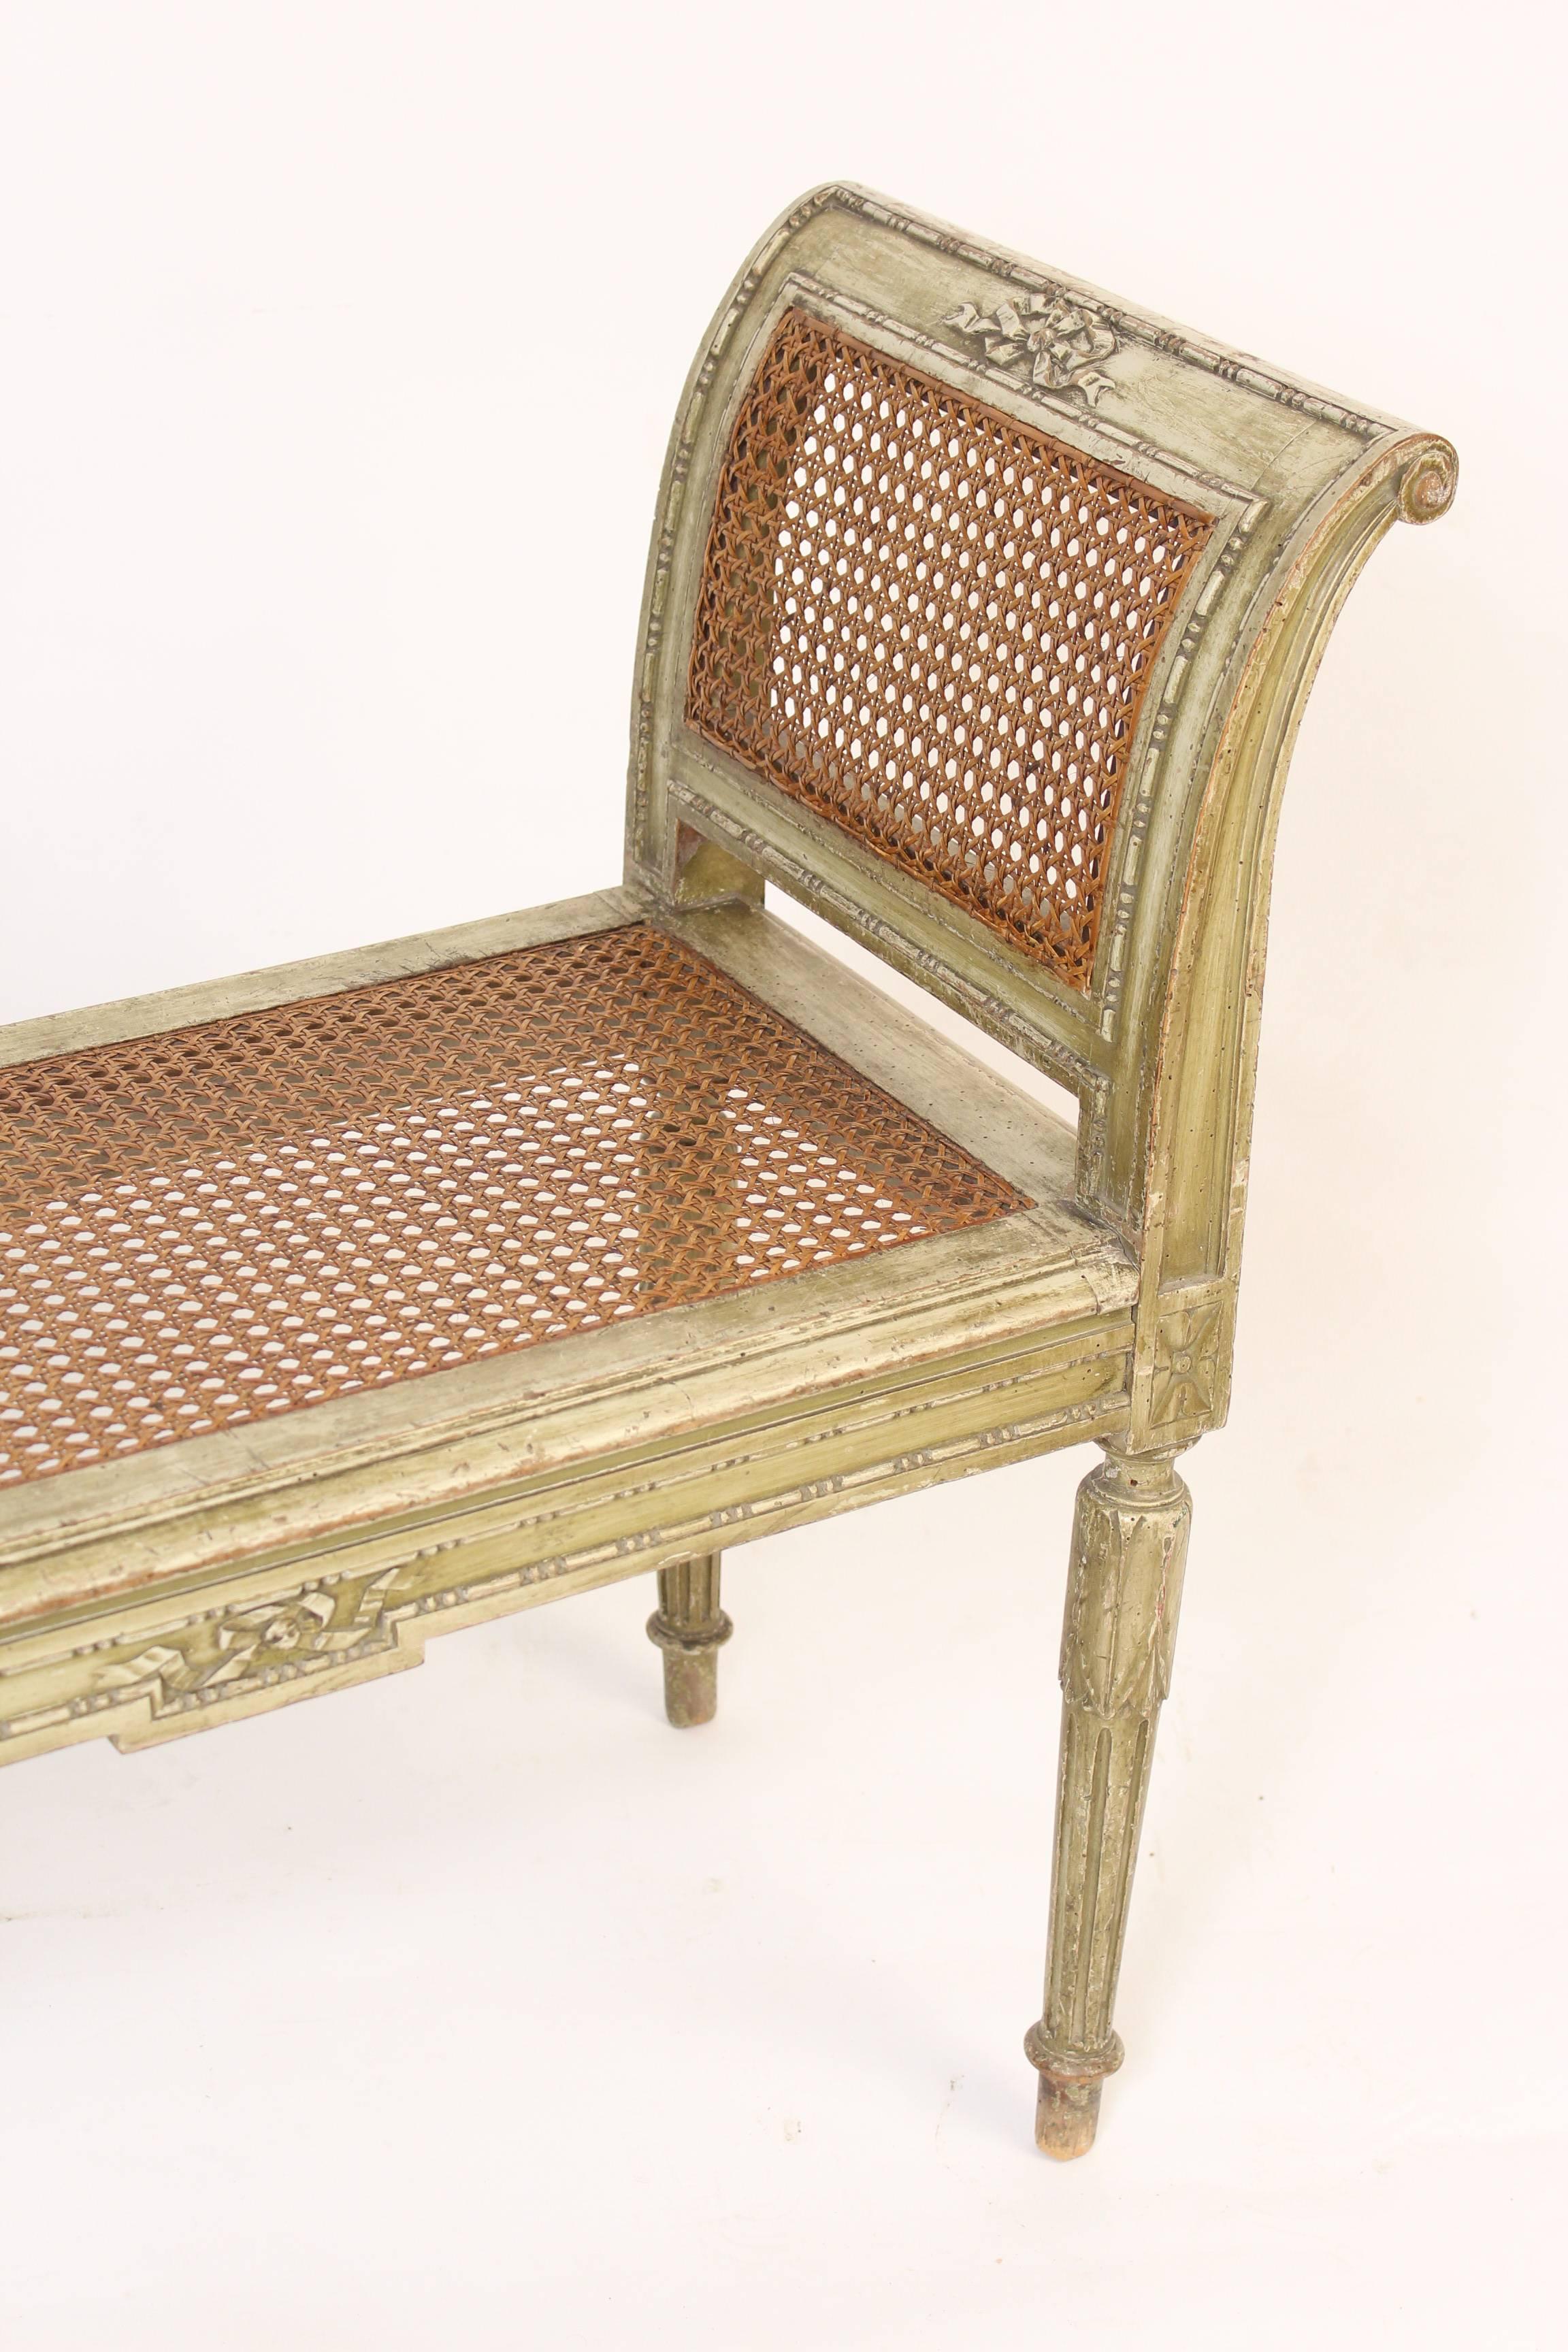 Louis XVI style painted bench with cane sides and seat, circa 1930. 